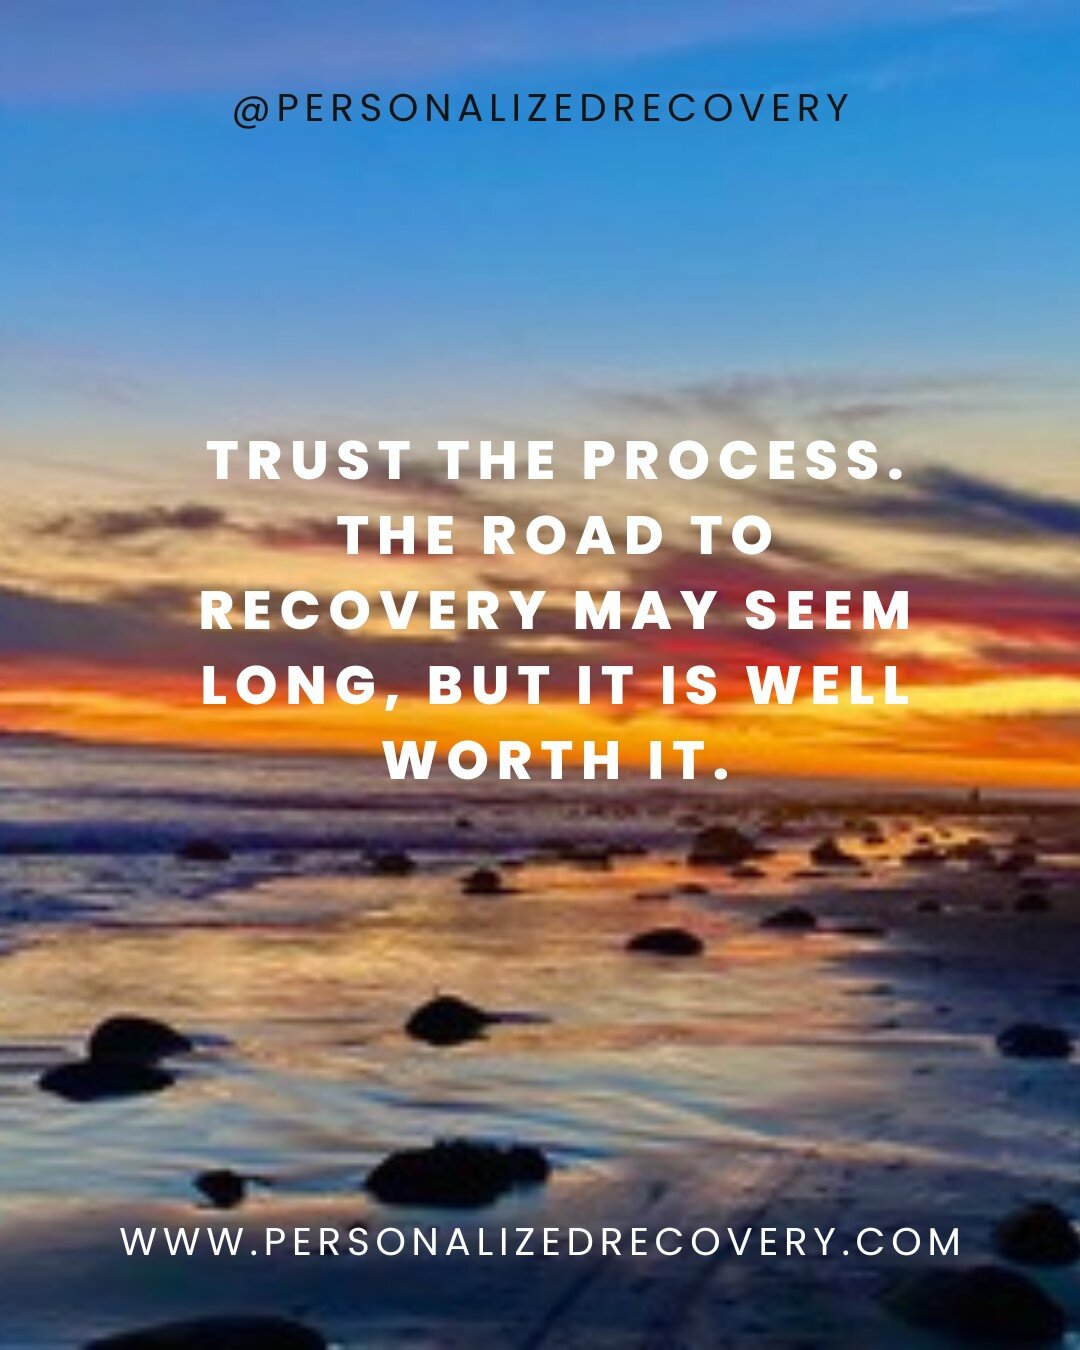 Trust the process. The road to recovery may seem long, but it is well worth it. 

Visit our website to learn more about our private at-home detox services to help you find your road to recovery. 

Link in the Bio!

#wellnessjourney #detox #recovery #